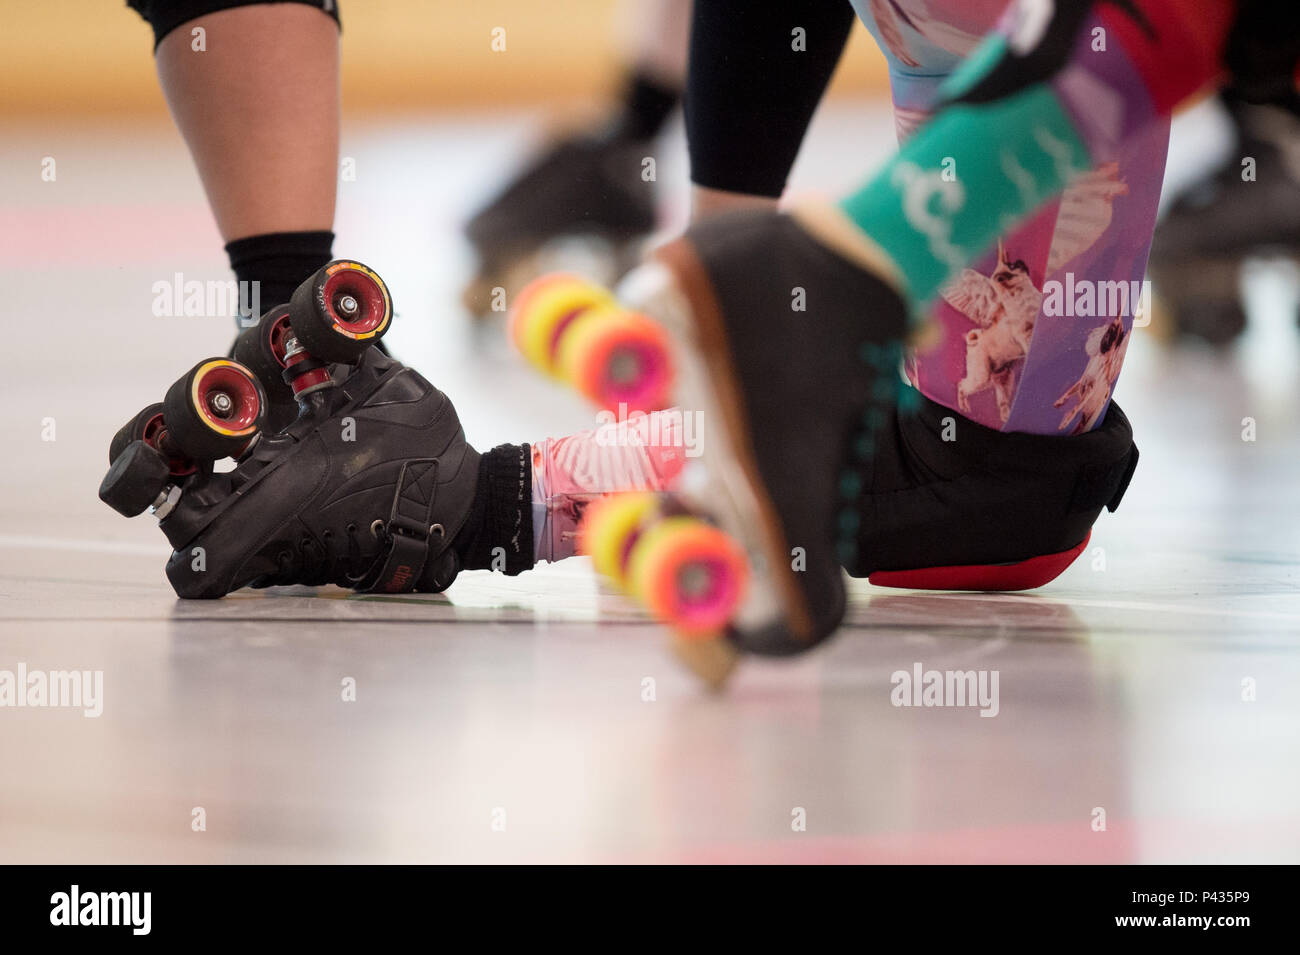 Germany, Potsdam. 14th Apr, 2018. A roller skater falls on the ground  during a game. Roller derby means full contact on roller skates. Women are  the stars of this sport, they want